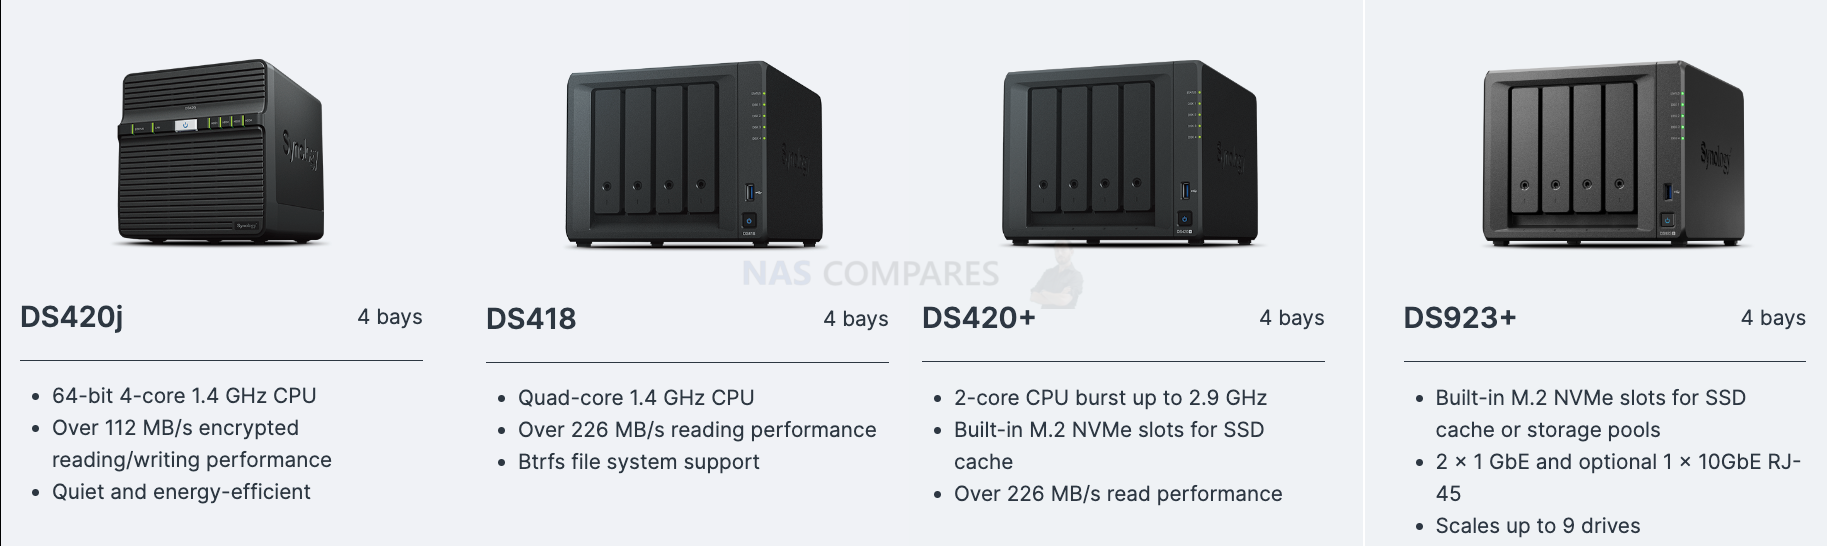 Synology 4-bay NAS range compared, which one is the best DS420j vs DS418 vs DS420+ vs DS923+ !